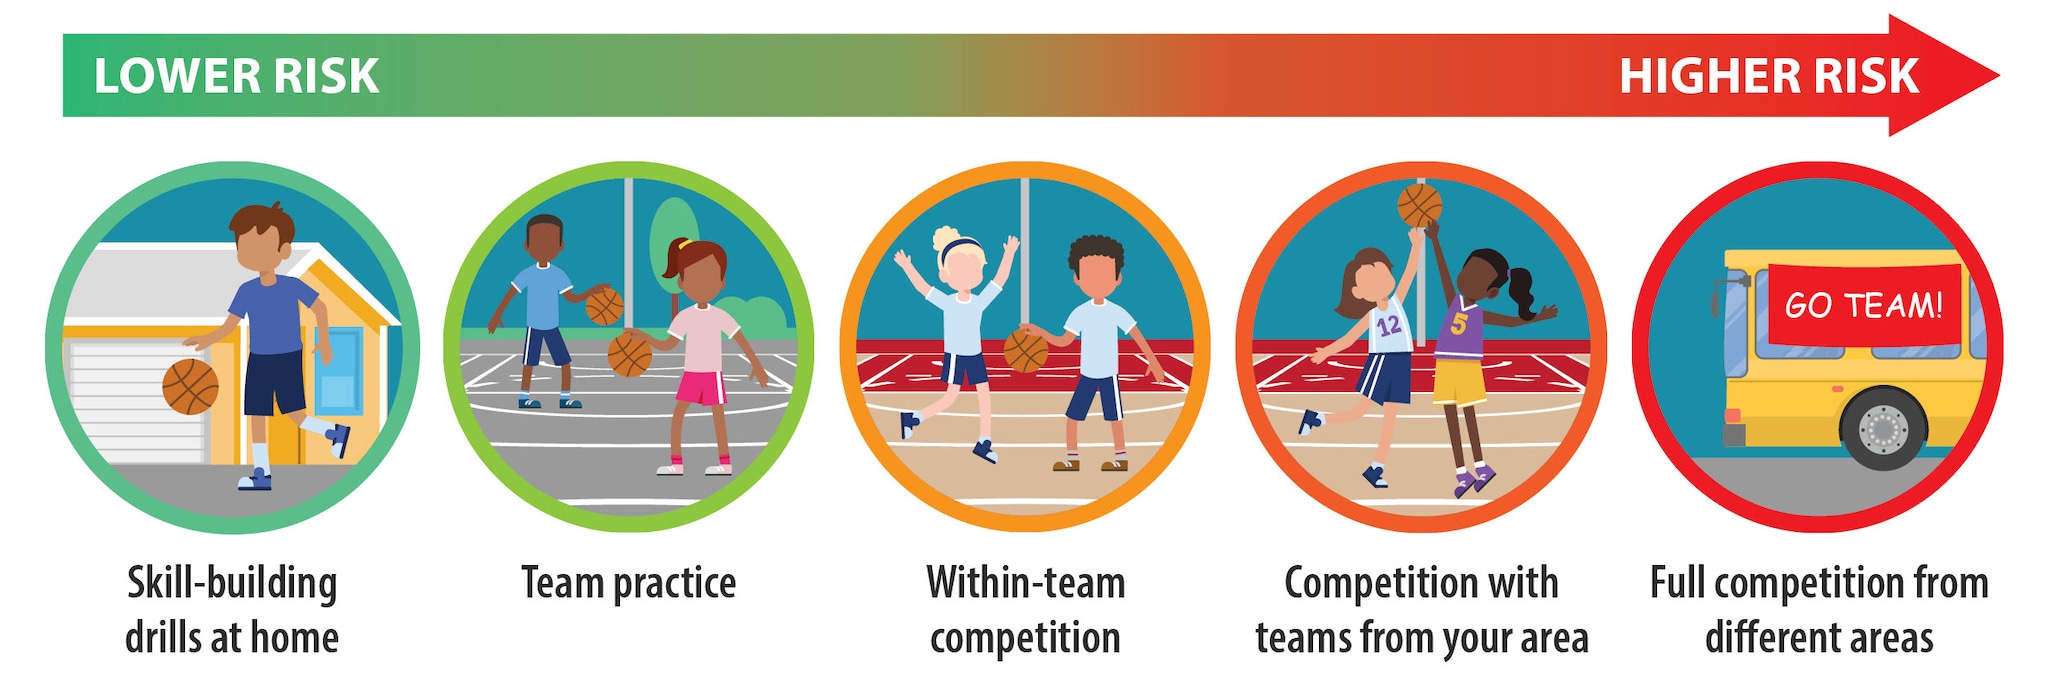 Participating in youth sports, the risk varies. Lower risk include skill-building drills at home, risk increases for team practice, and is higher for within-team competition. Risk further increases for competition with teams from your area. Even higher risk for full competition from different areas.